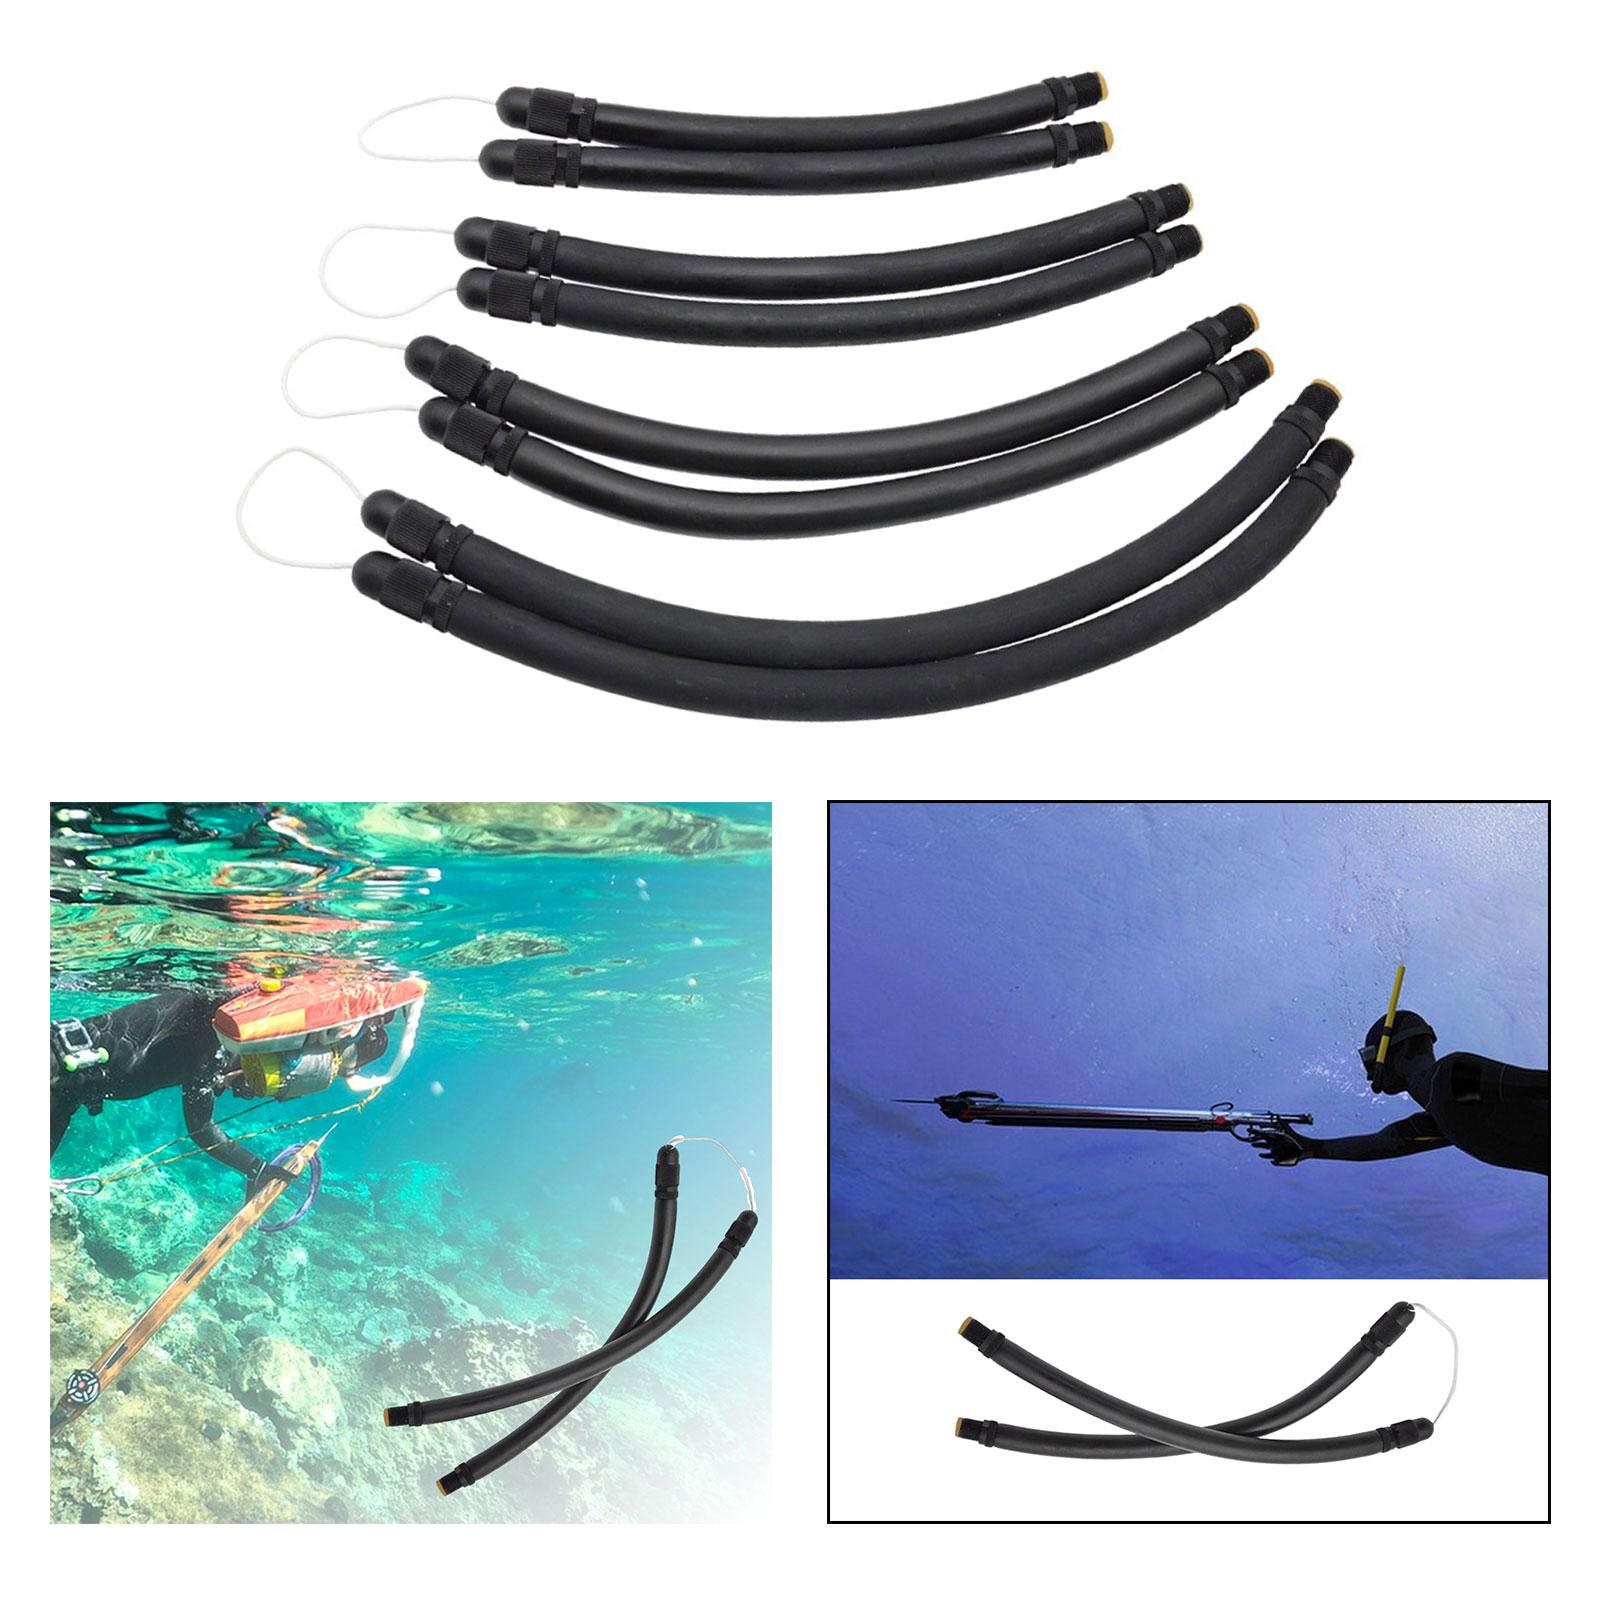 Spear Band Ruer Tube Spearfishing for Outdoor Scuba Diving Accessories